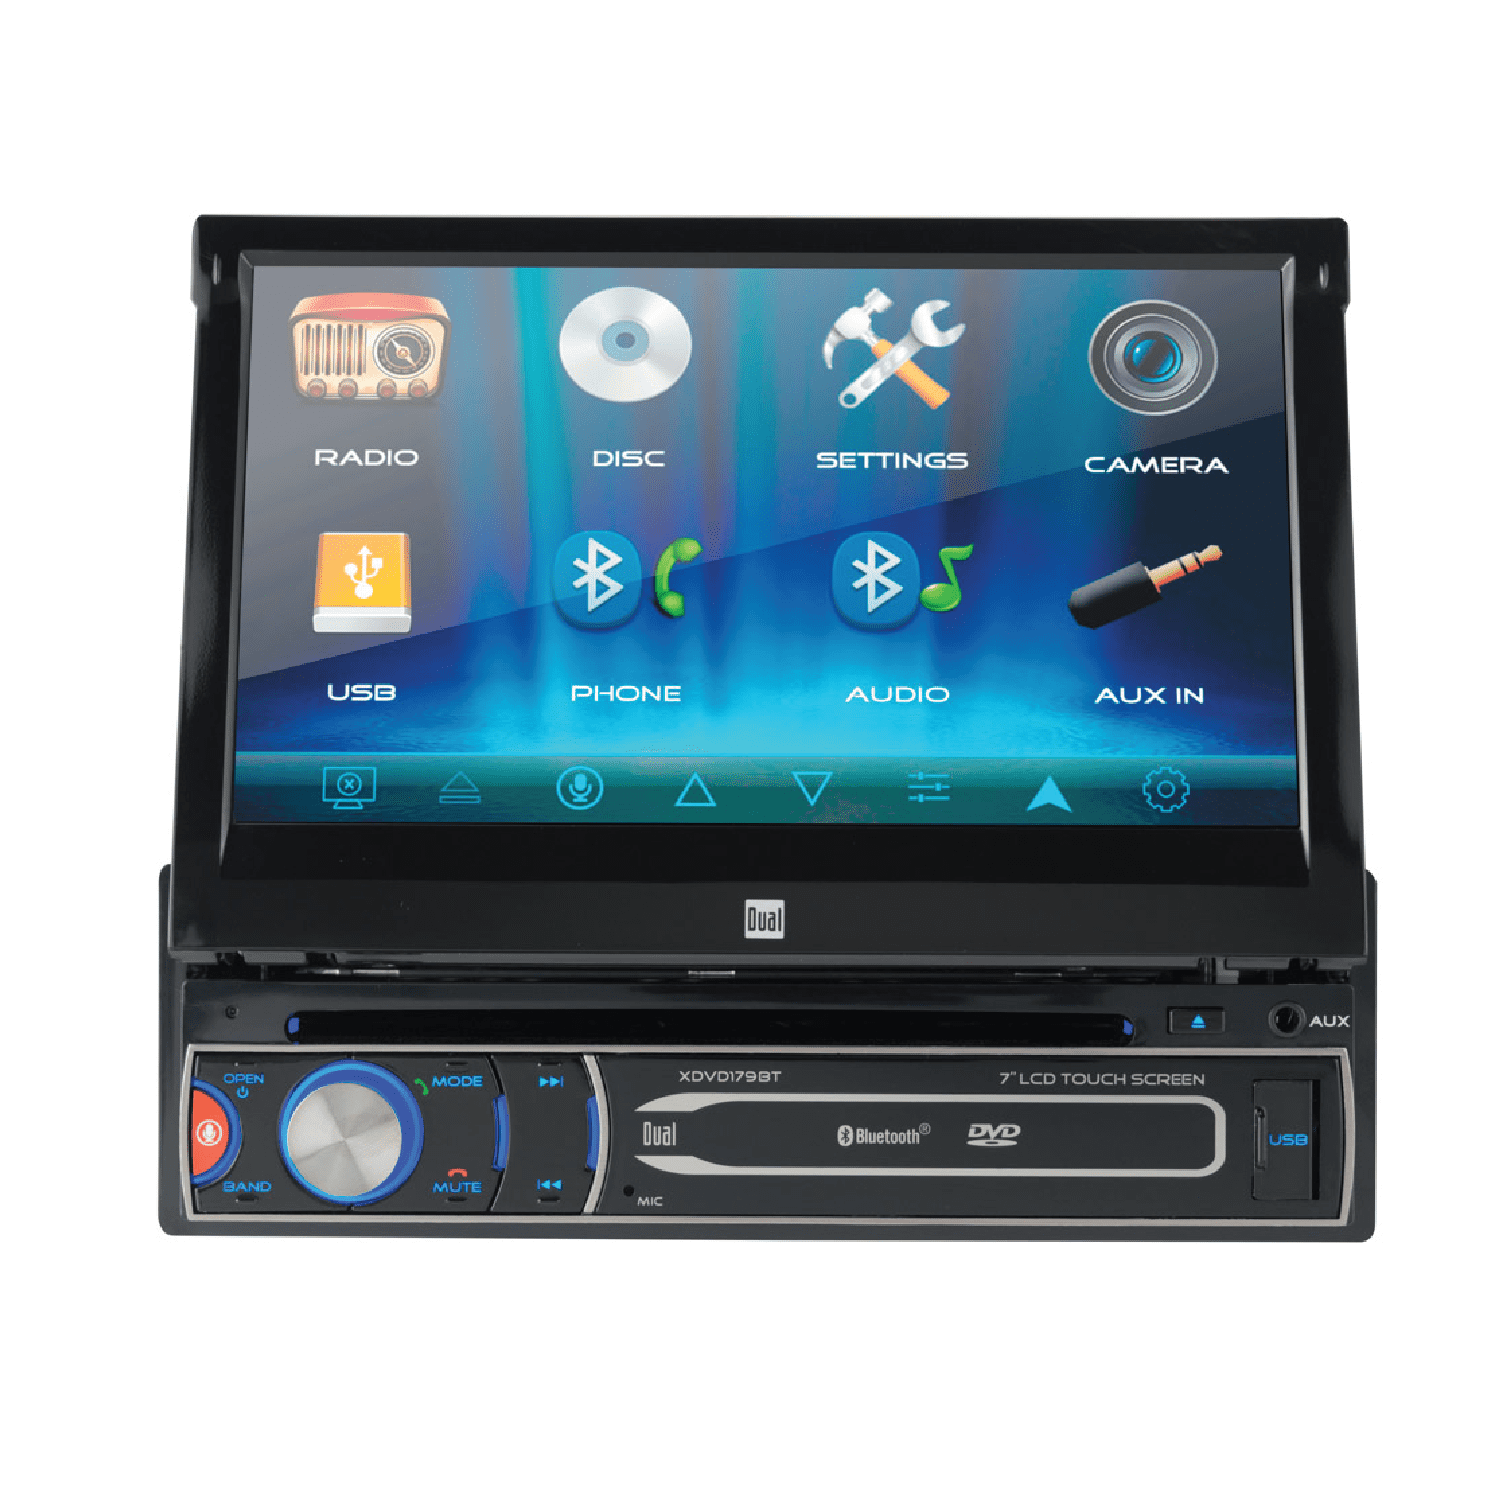 Dual Electronics XDVD179BT 7" Motorized Touch Screen Single DIN Car Stereo Receiver, Siri/Google Voice Assist, Bluetooth, CD/DVD Player